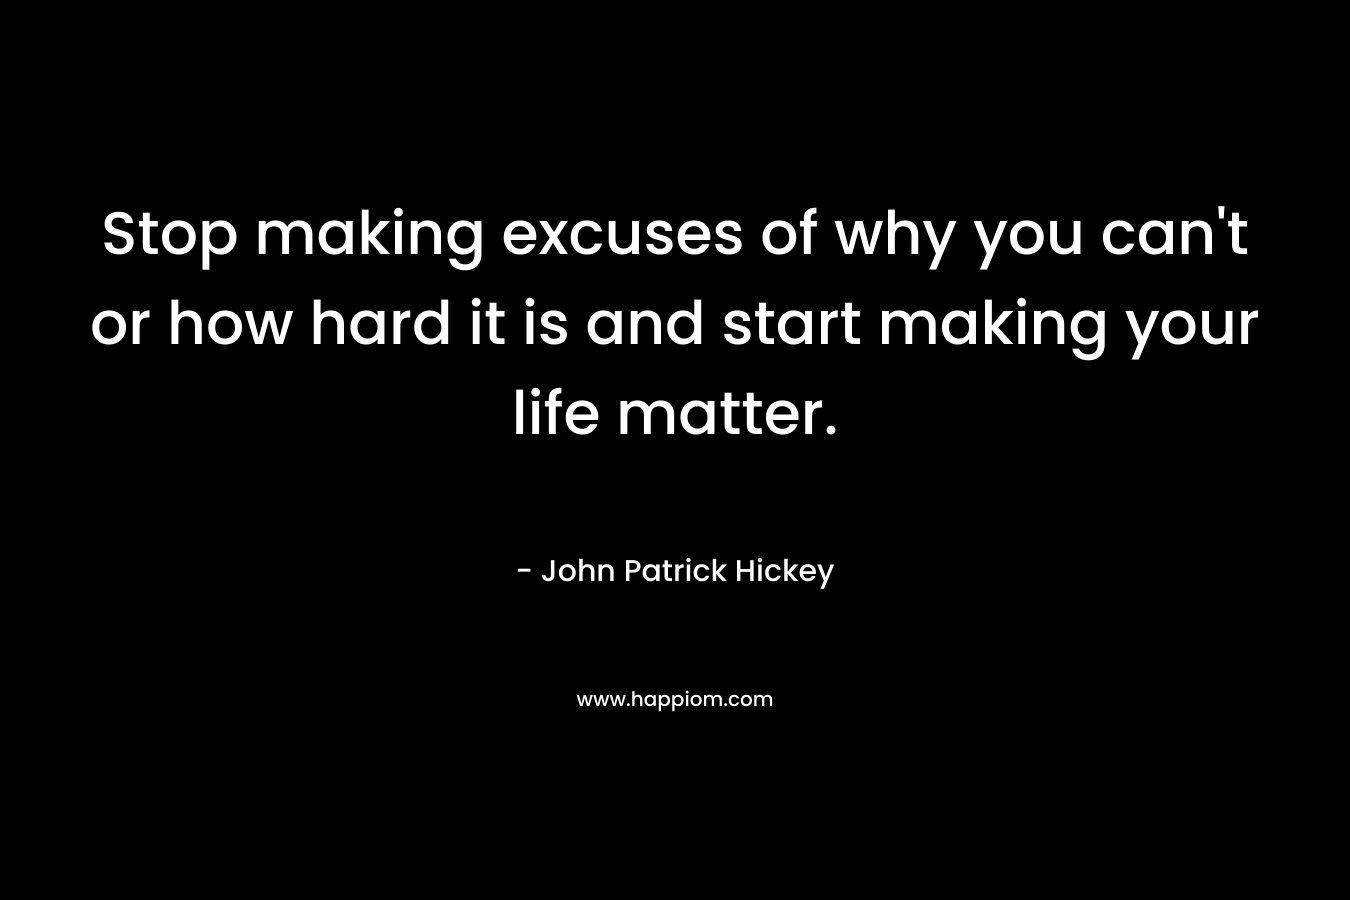 Stop making excuses of why you can't or how hard it is and start making your life matter.